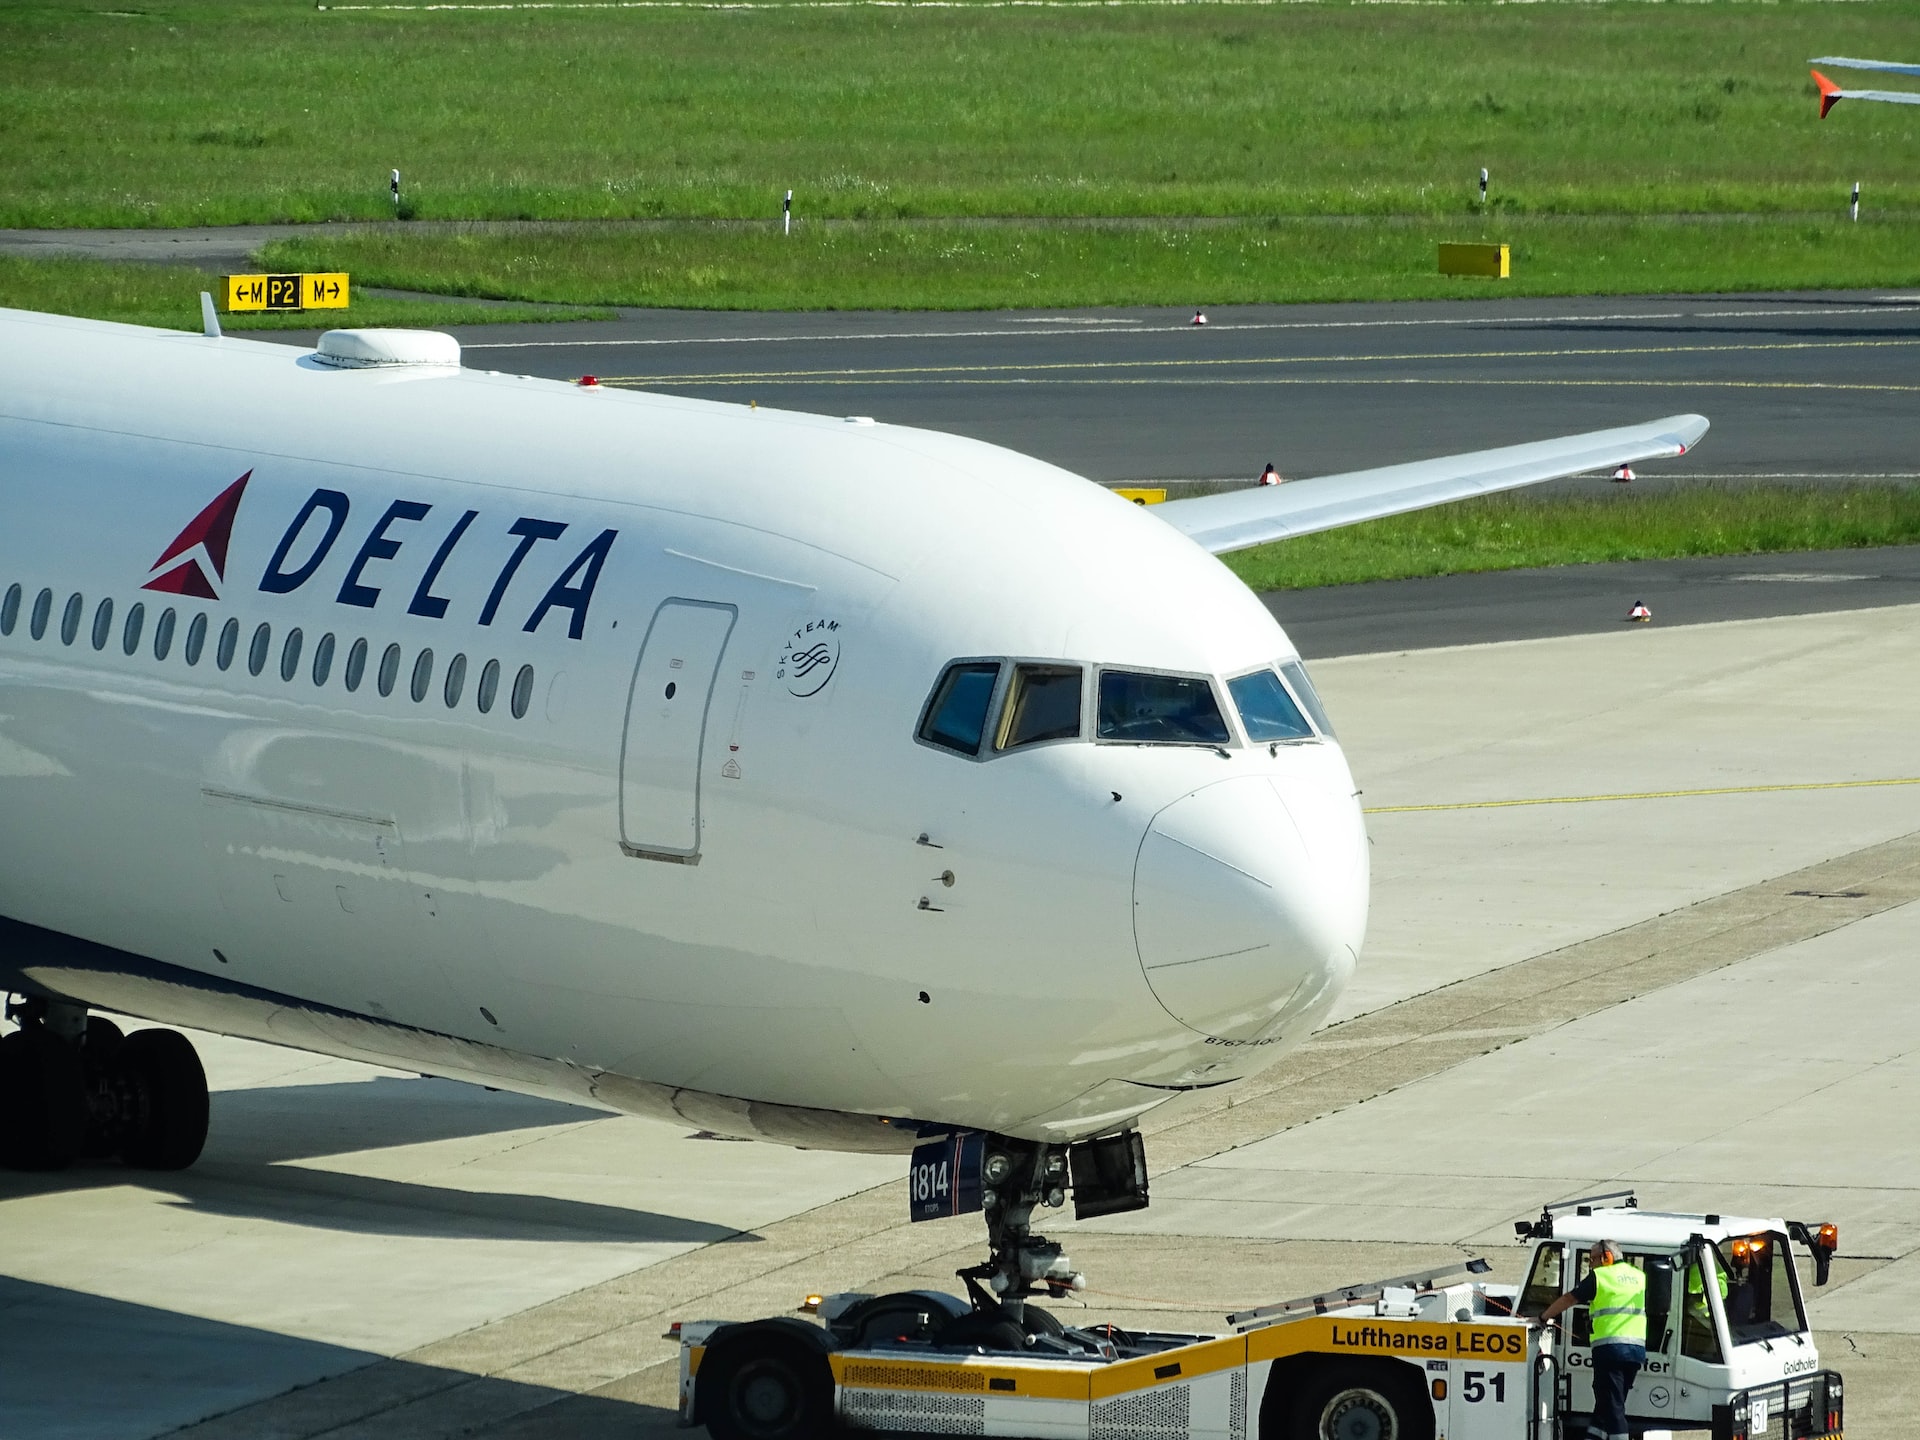 A commercial aircraft of one of the most profitable airlines Delta.